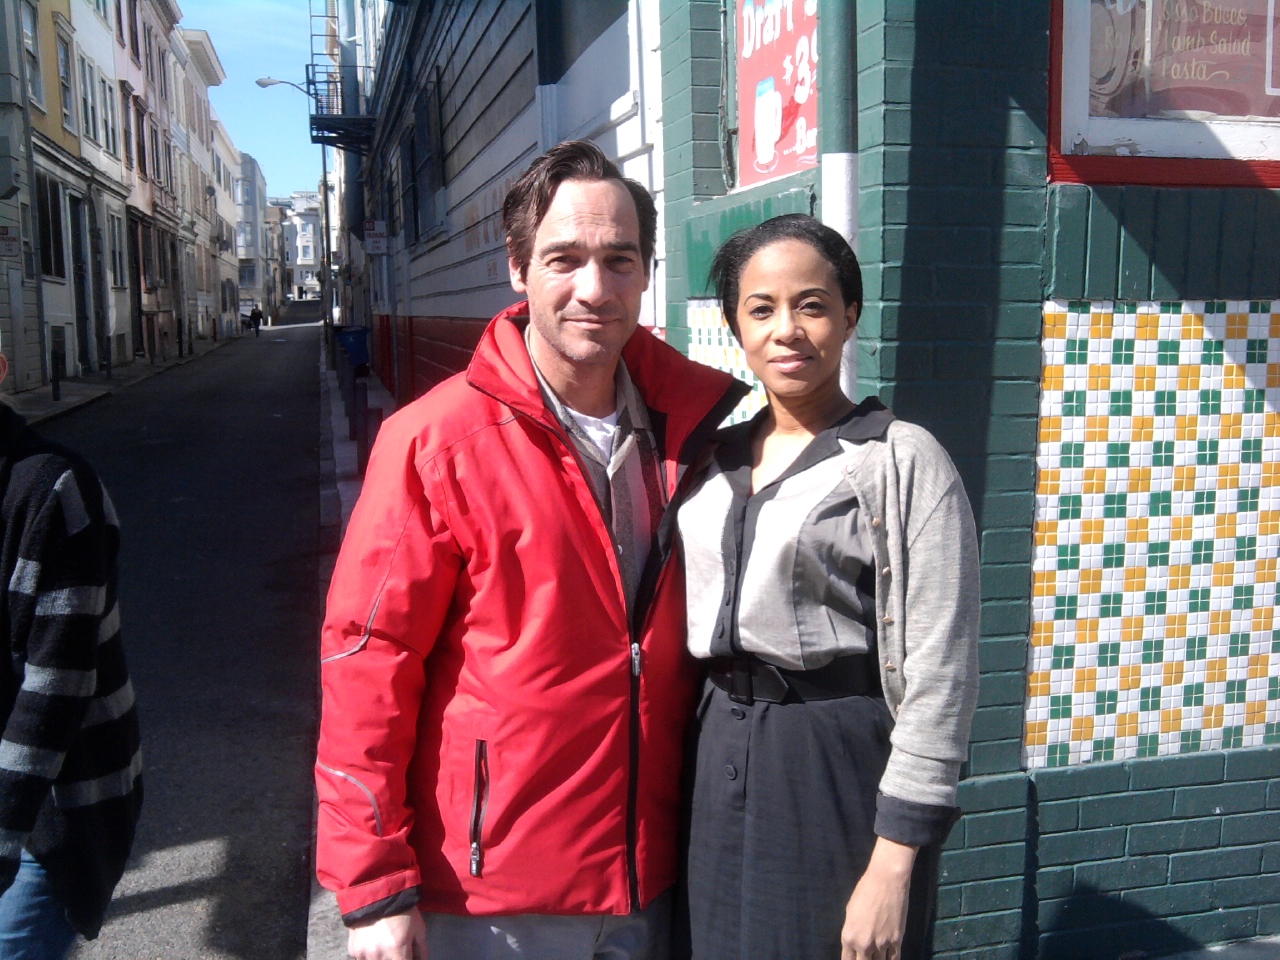 Veronica Loud with Jean-Marc Barr on location for the feature film, 